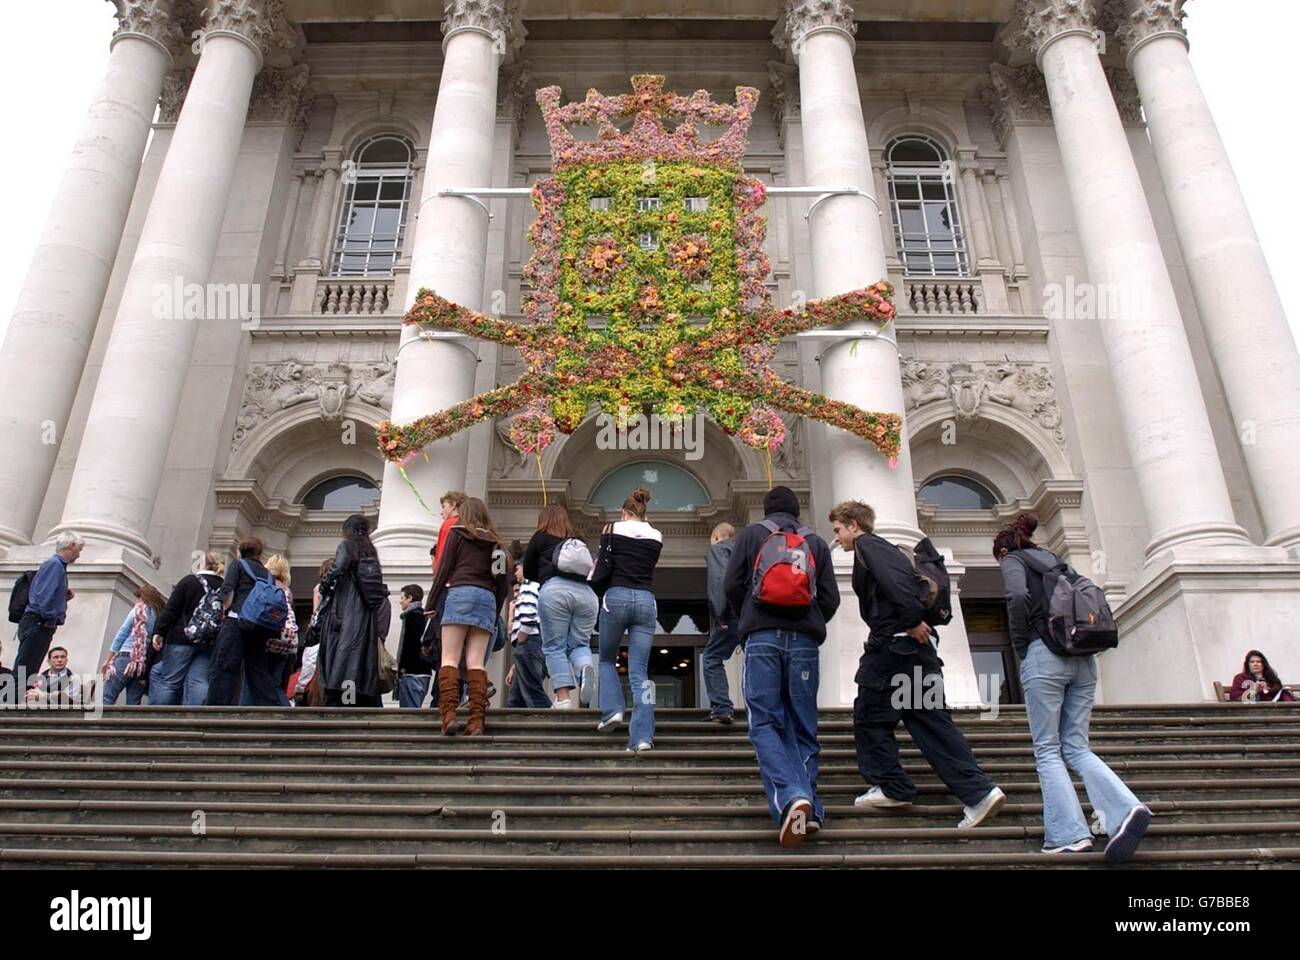 Hew Locke's new work 'King Creole' on the front of Tate Britain in central London. Locke describes the piece as a 'voo-doo-esque' version of Augustus Pugin's House of Commons coat of arms. Stock Photo